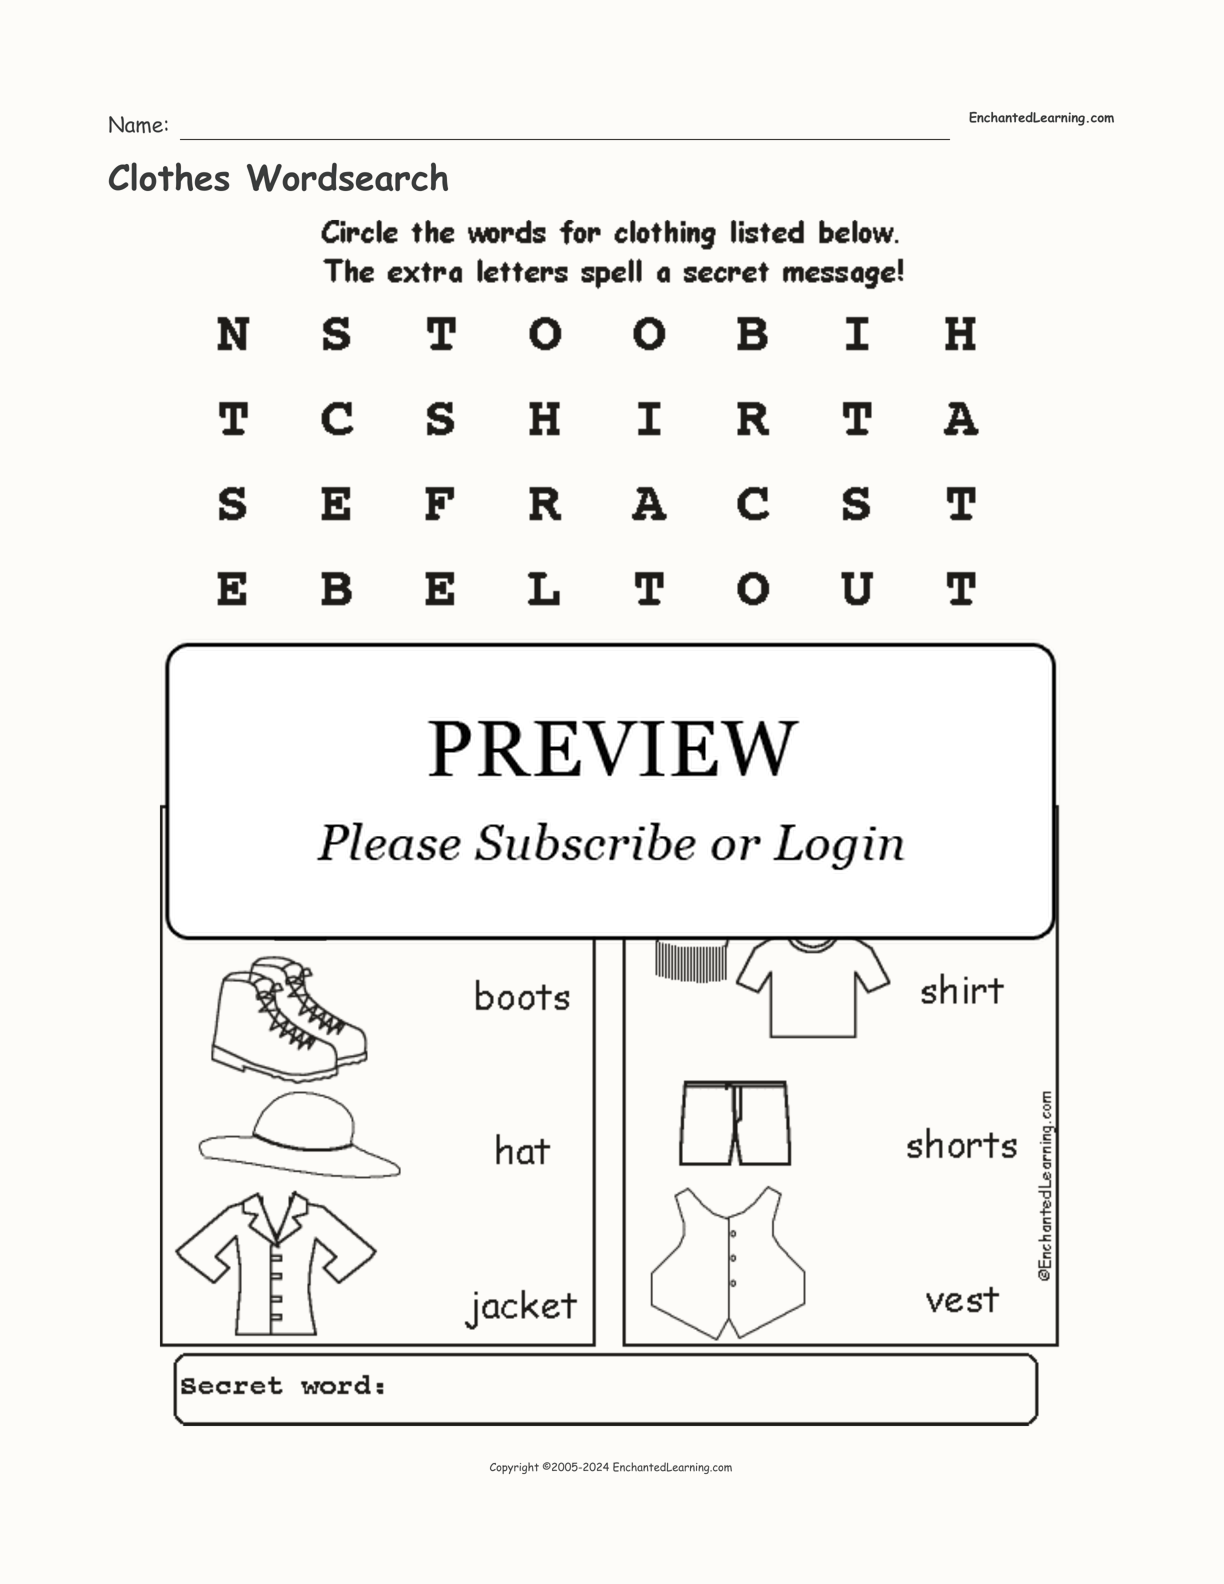 Clothes Wordsearch interactive worksheet page 1